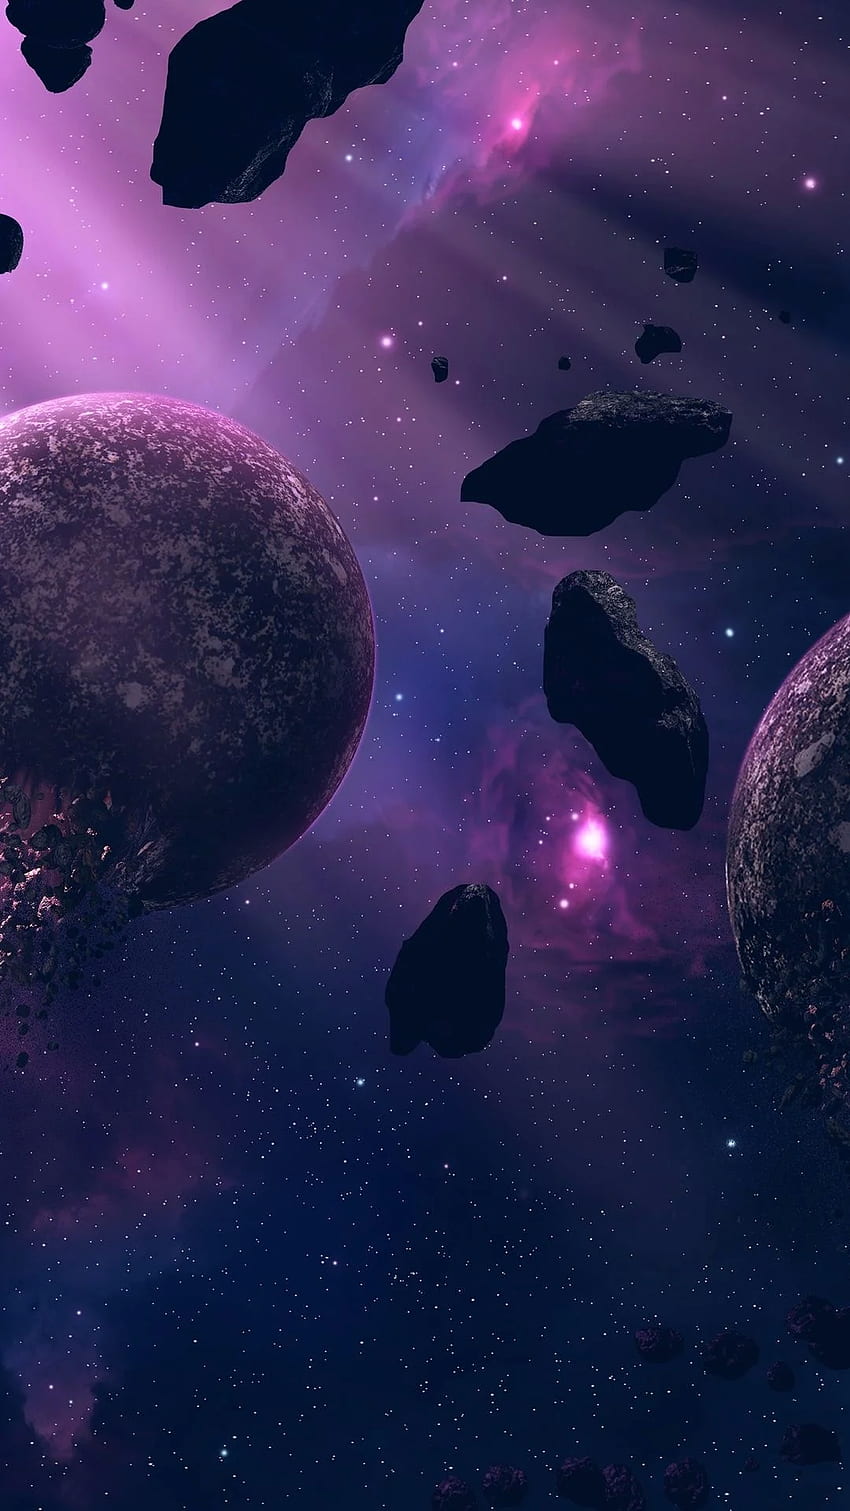 https://e0.pxfuel.com/wallpapers/108/1004/desktop-wallpaper-outer-space-sky-violet-astronomical-object-purple-space-real-space-phone.jpg